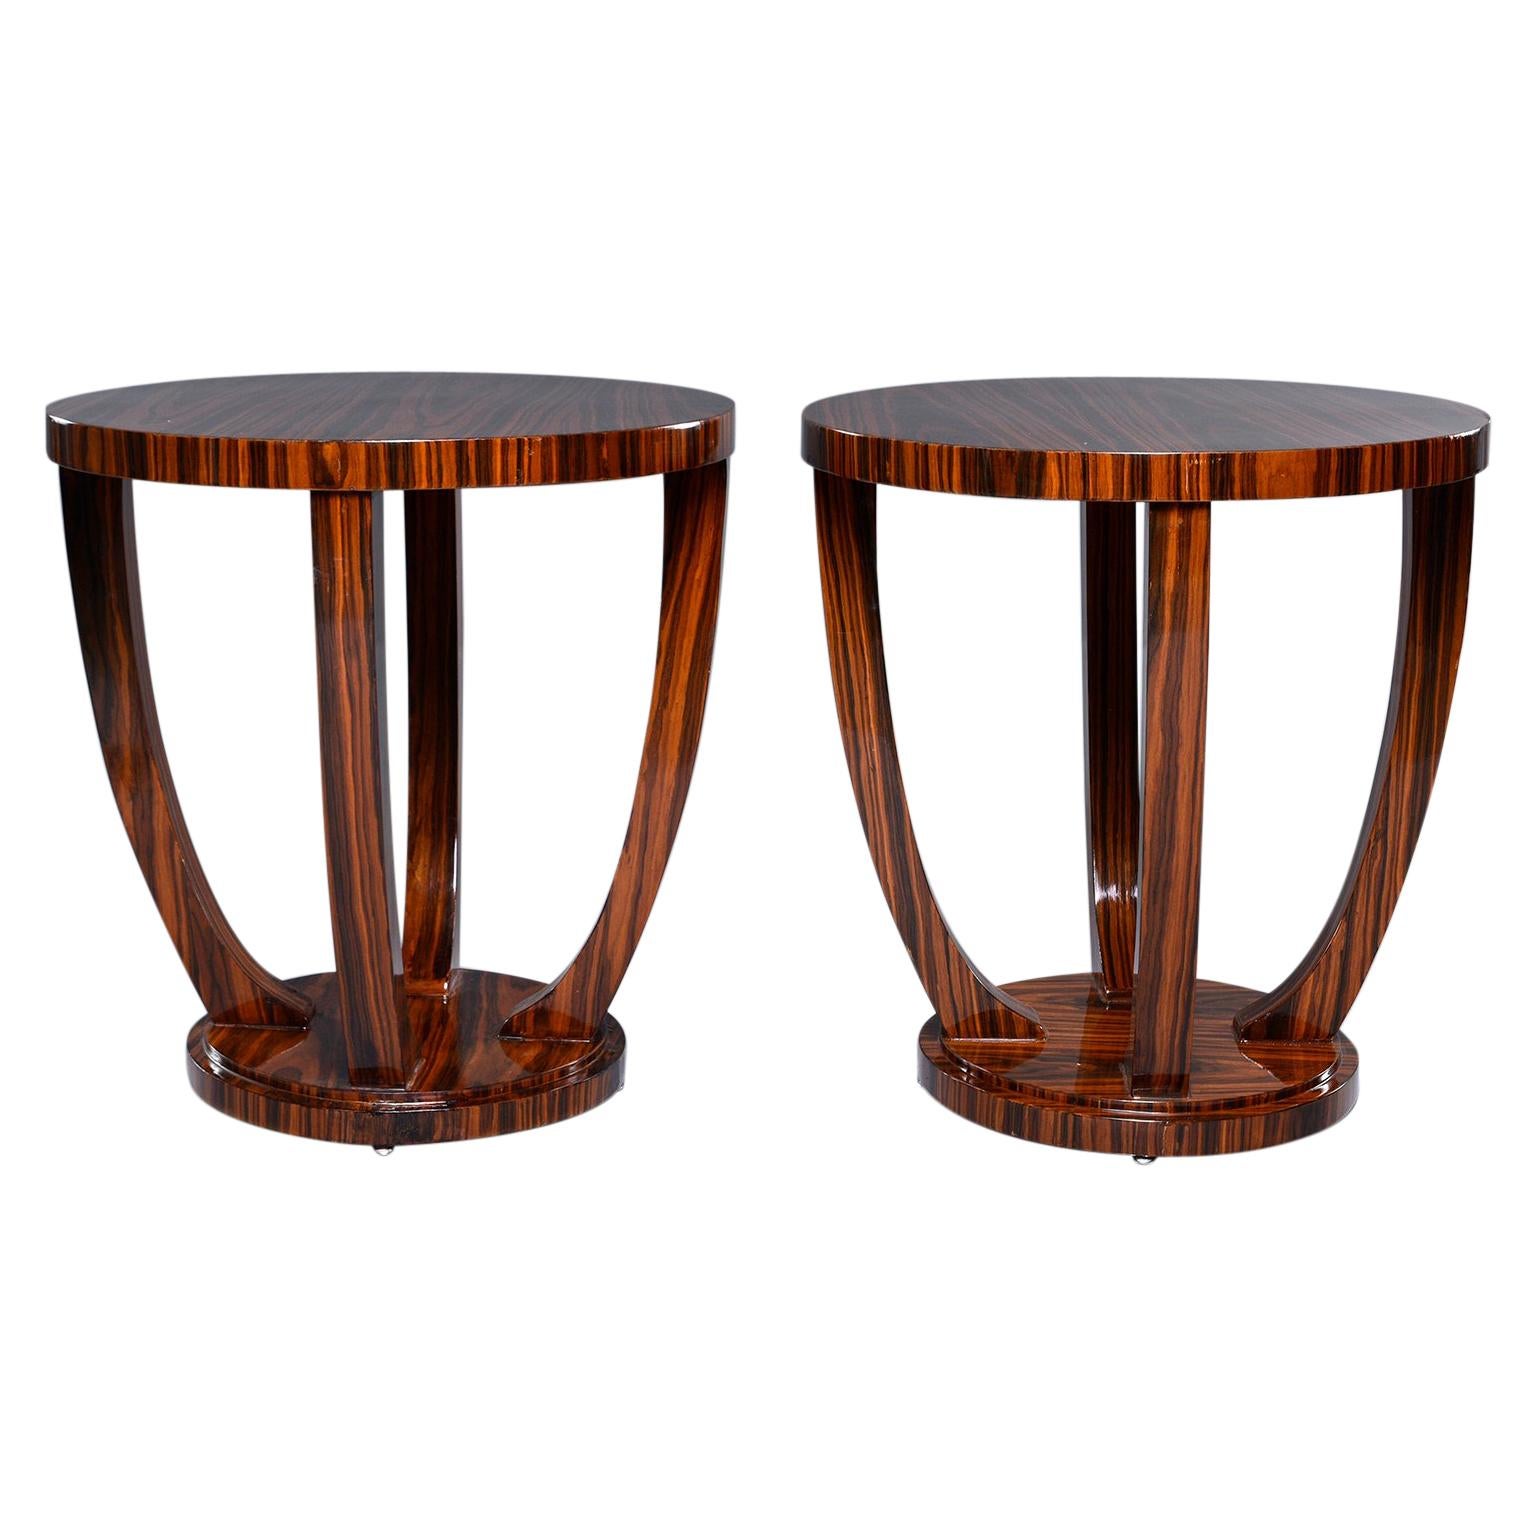 Pair of Art Deco Style Palisander Round Side Tables